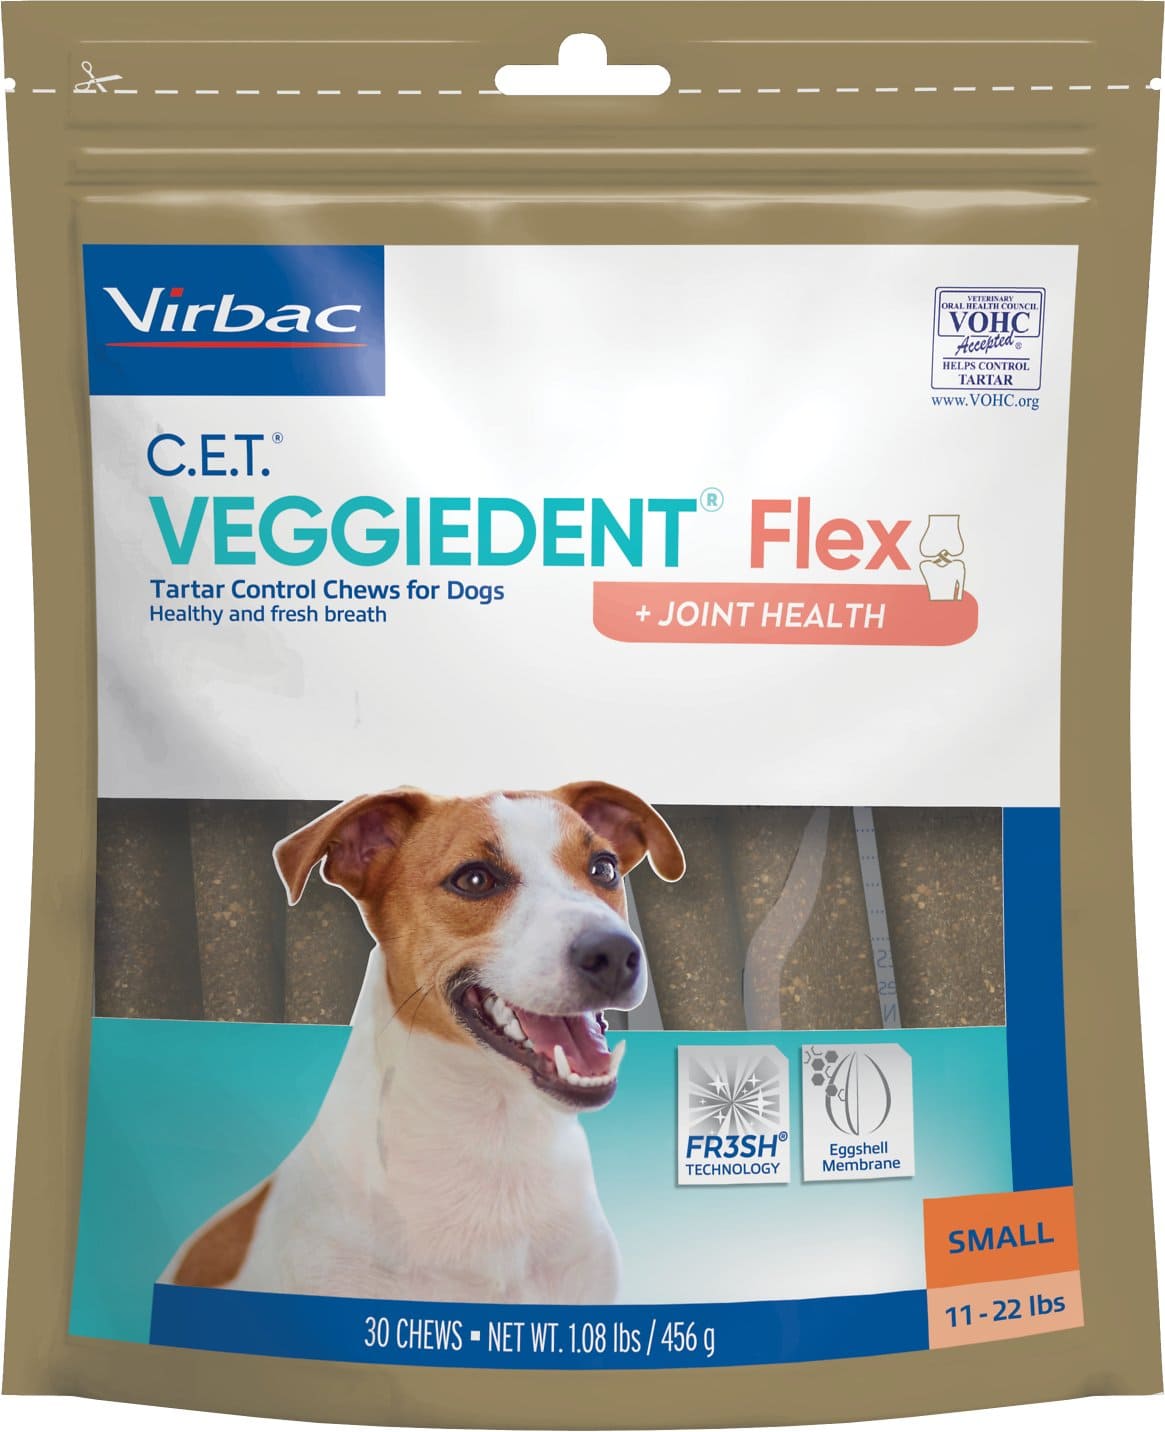 C.E.T. VeggieDent Flex + Joint Health for small dogs 11-22 lbs 30 chews 1